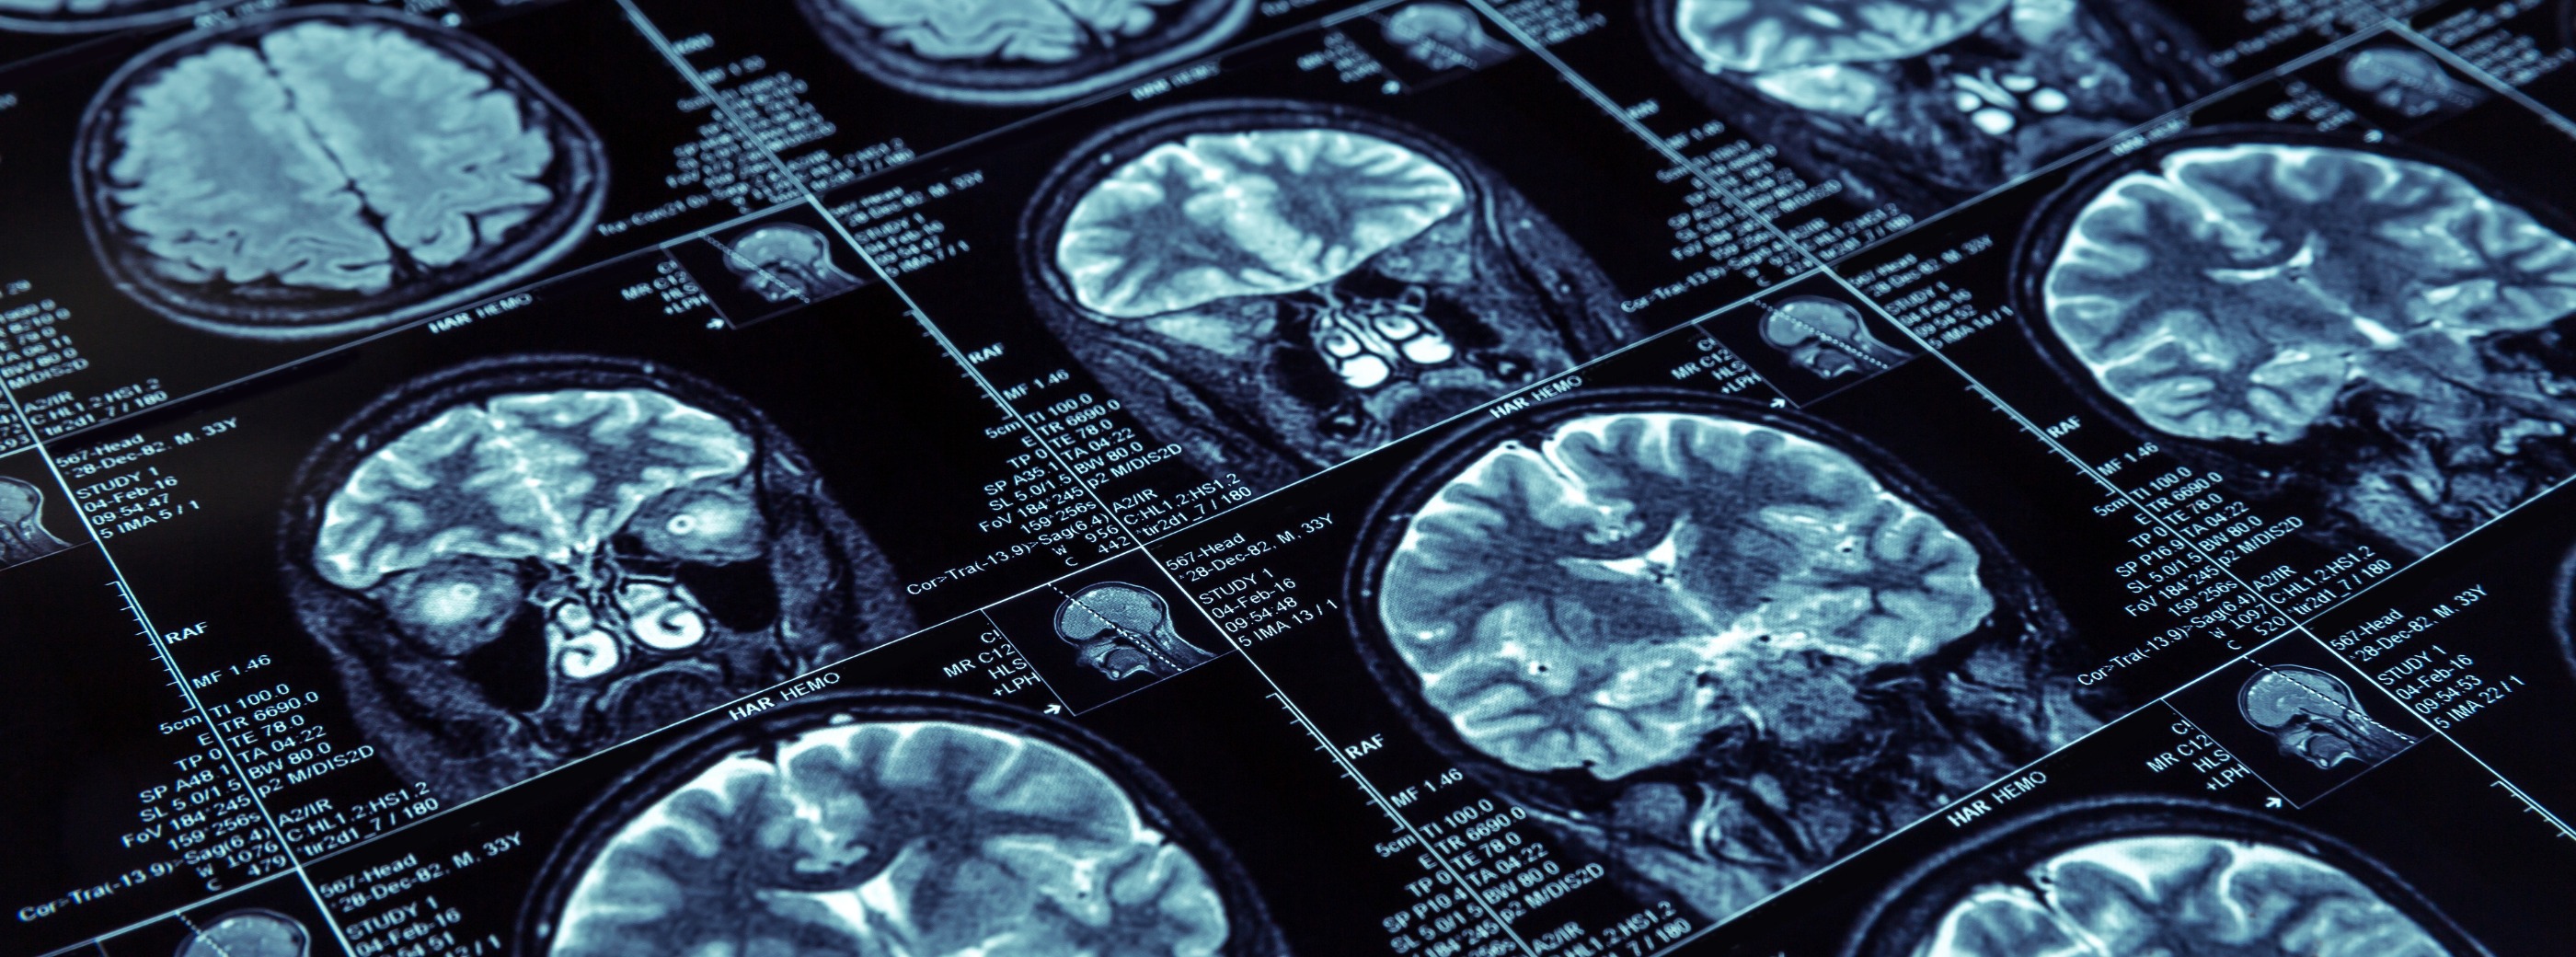 Stock image of magnetic resonance image results